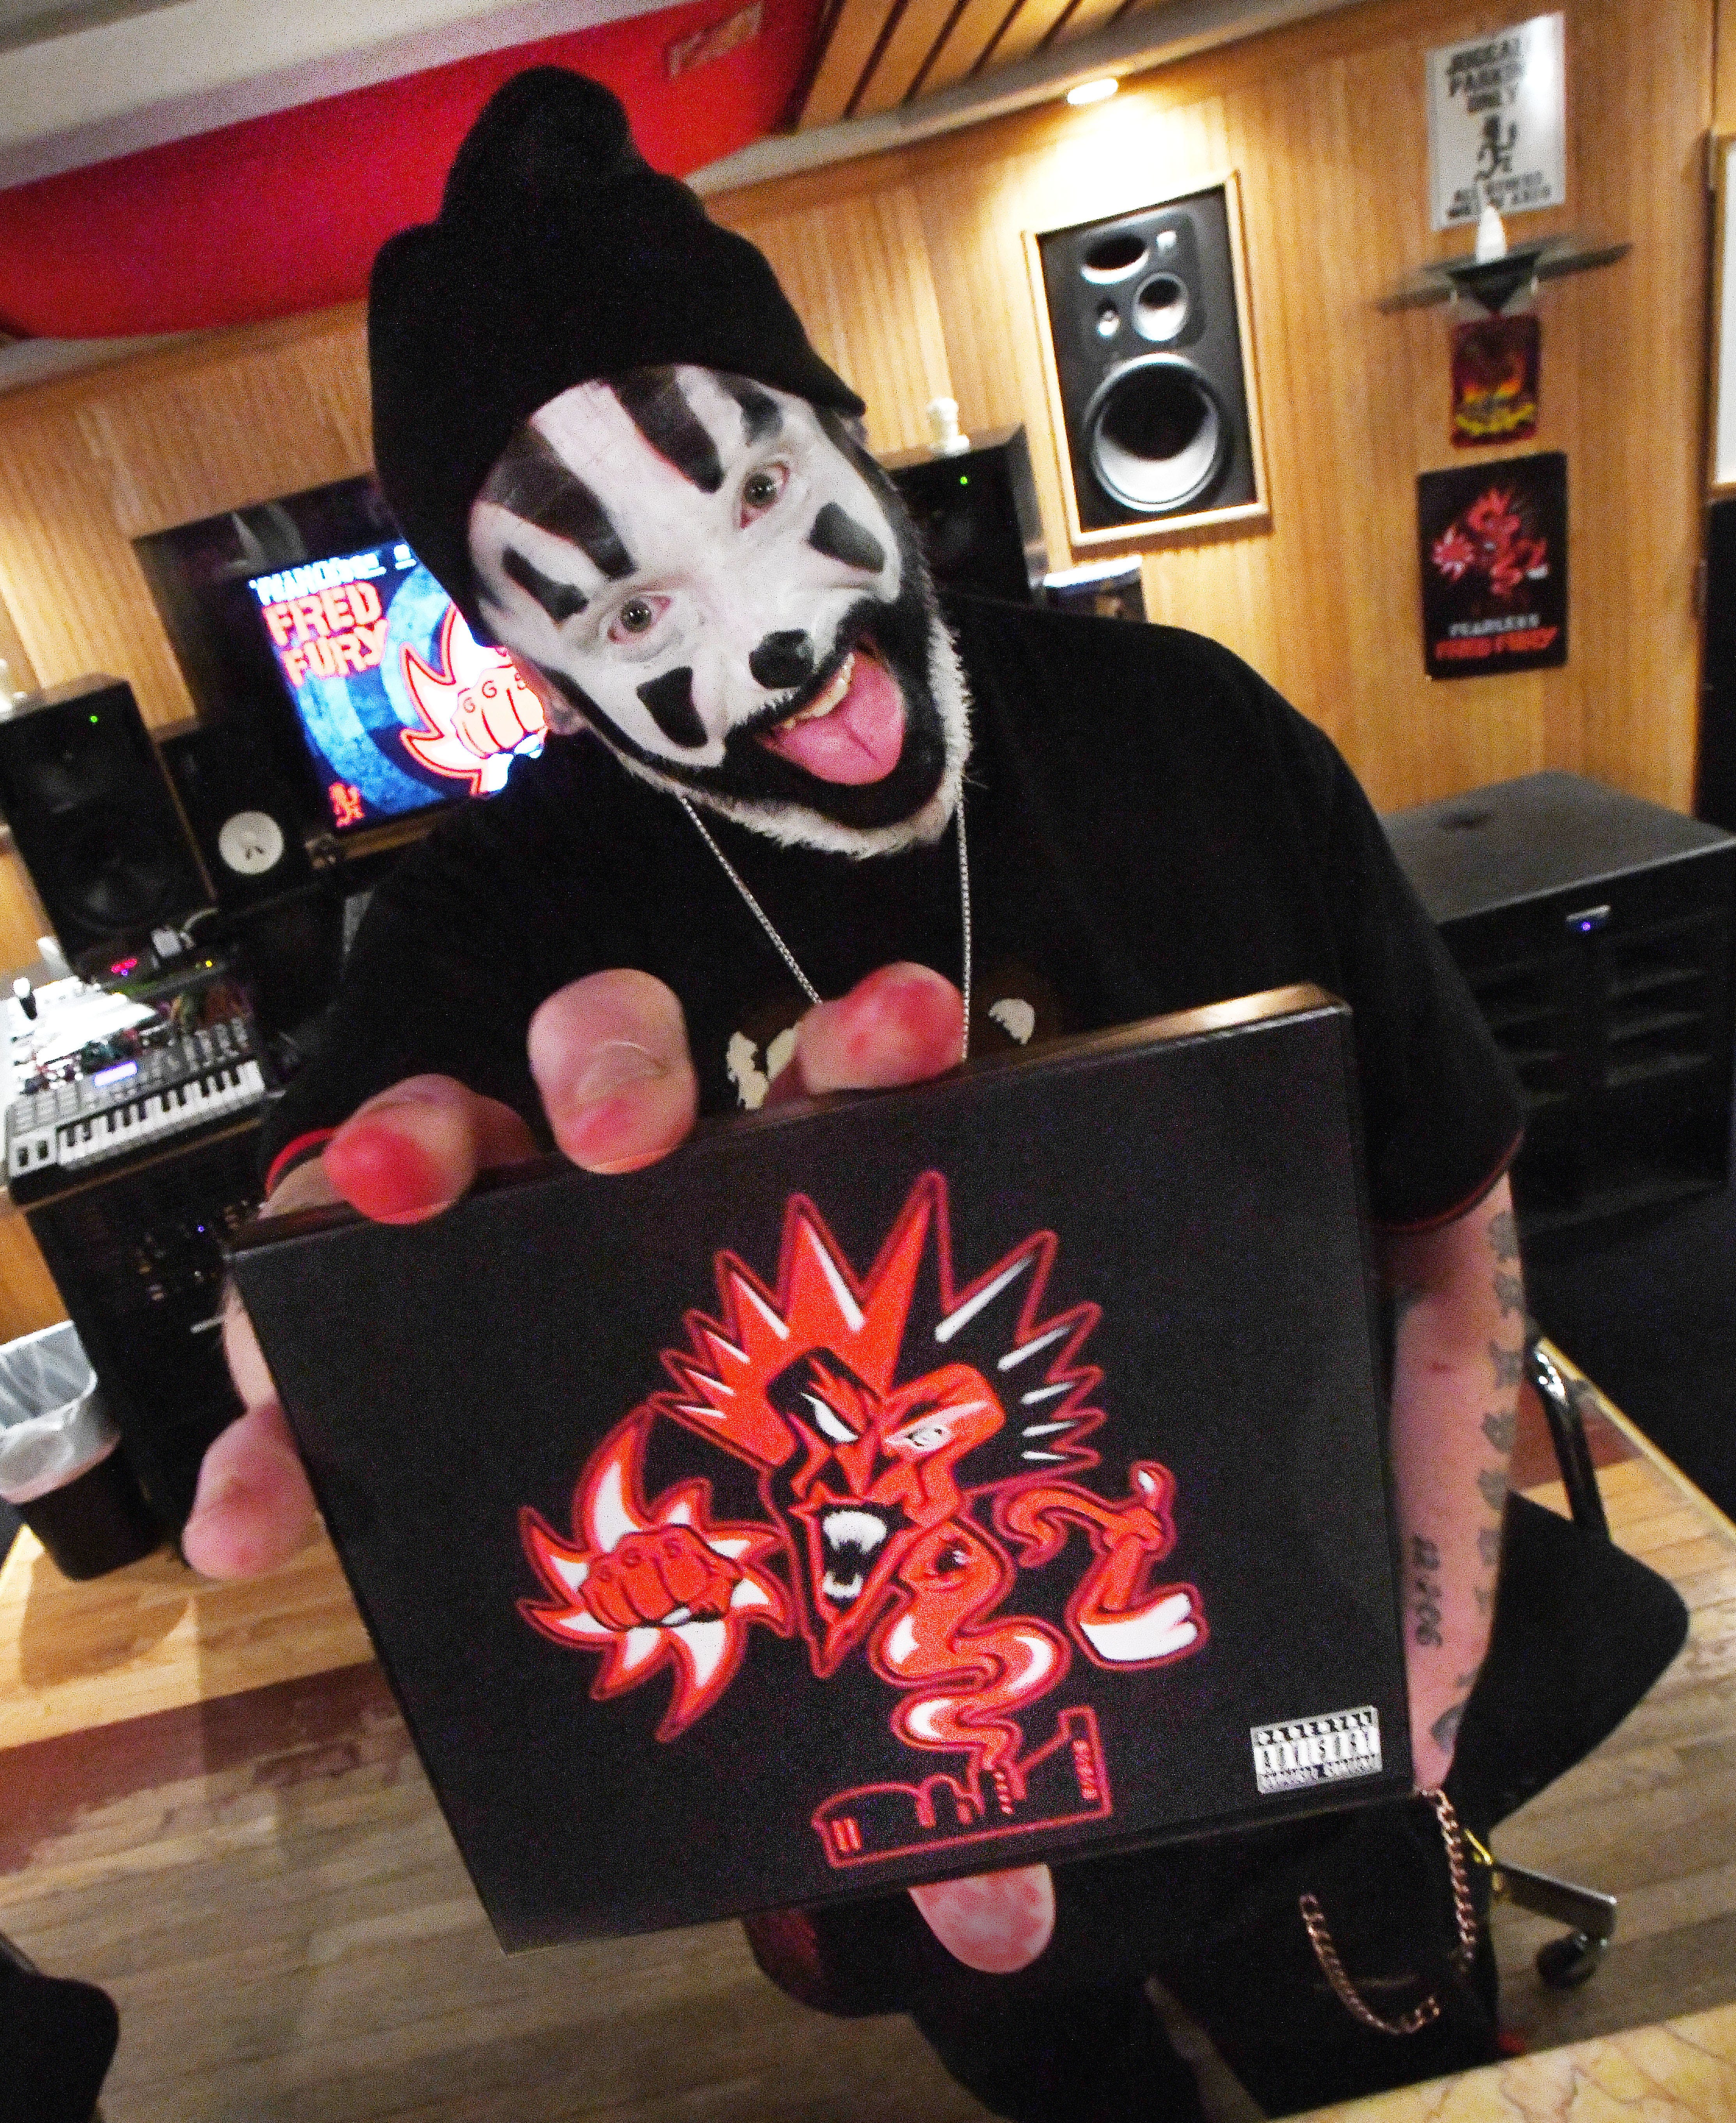 Violent J, aka Joseph Bruce of Insane Clown Posse, shows a copy of their upcoming new release, Fearless Fred Fury, in Farmington Hills, Michigan on Tuesday, Feb. 6, 2019.